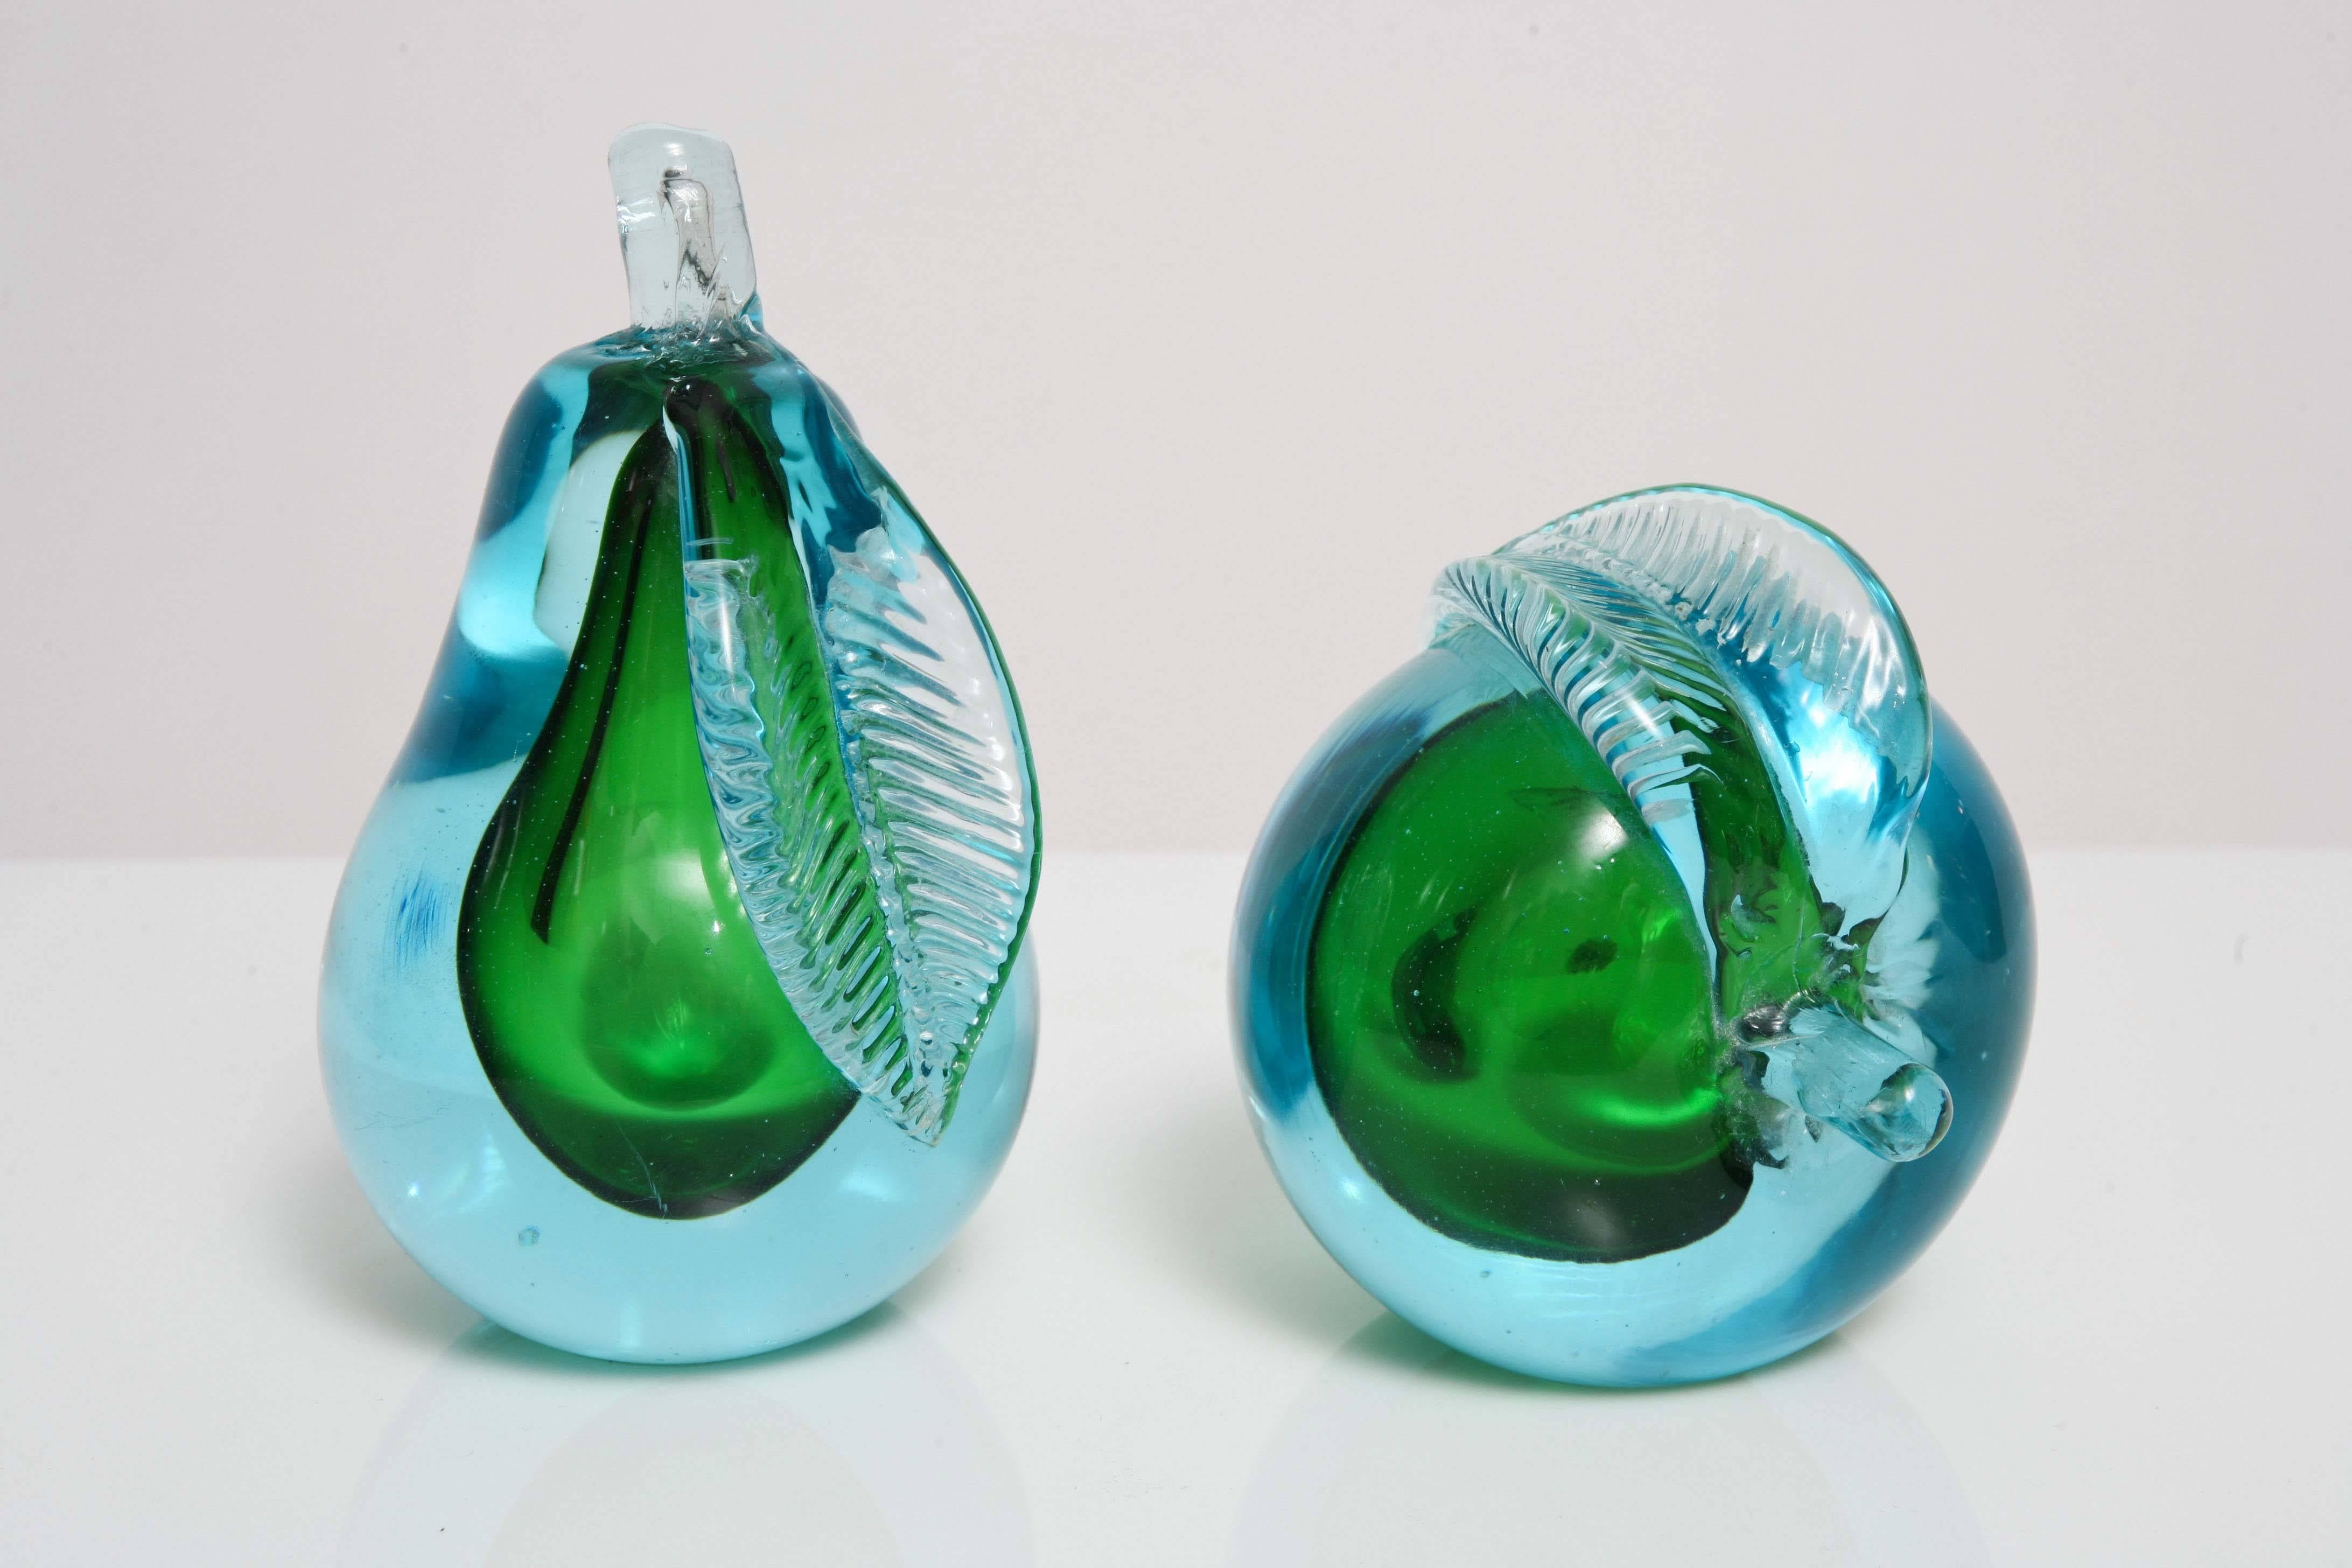 Hand blown Murano glass apple / pear bookends. Worn paper label. Colors are a light blue exterior with green interior. Striking set, could be used either as bookends or positioned in two different positions.